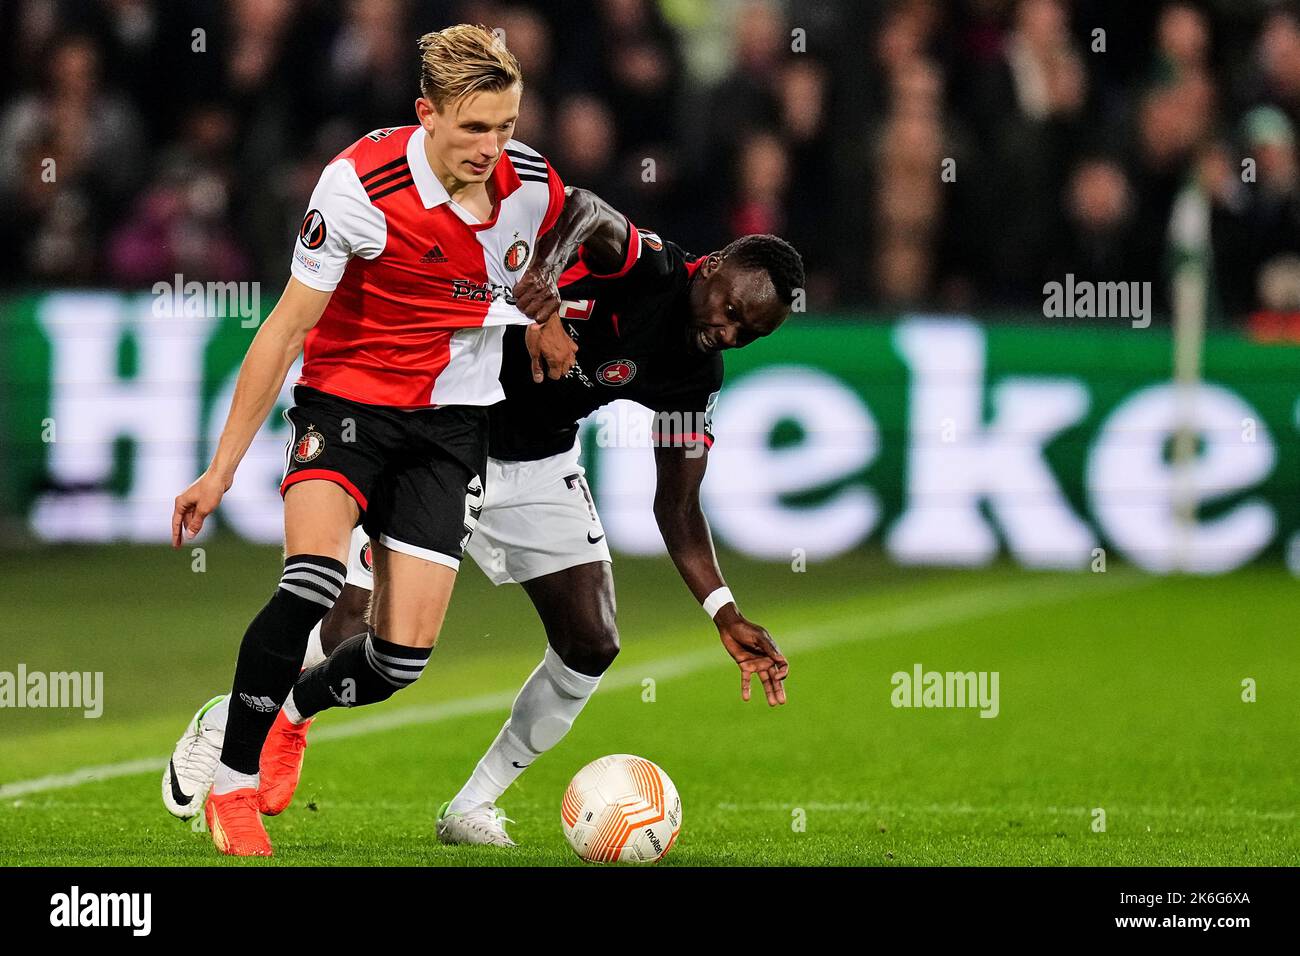 Rotterdam - Marcus Holmgren Pedersen of Feyenoord, Pione Sisto of FC Midtjylland during the match between Feyenoord v FC Midtjylland at Stadion Feijenoord De Kuip on 13 October 2022 in Rotterdam, The Netherlands. (Box to Box Pictures/Yannick Verhoeven) Stock Photo